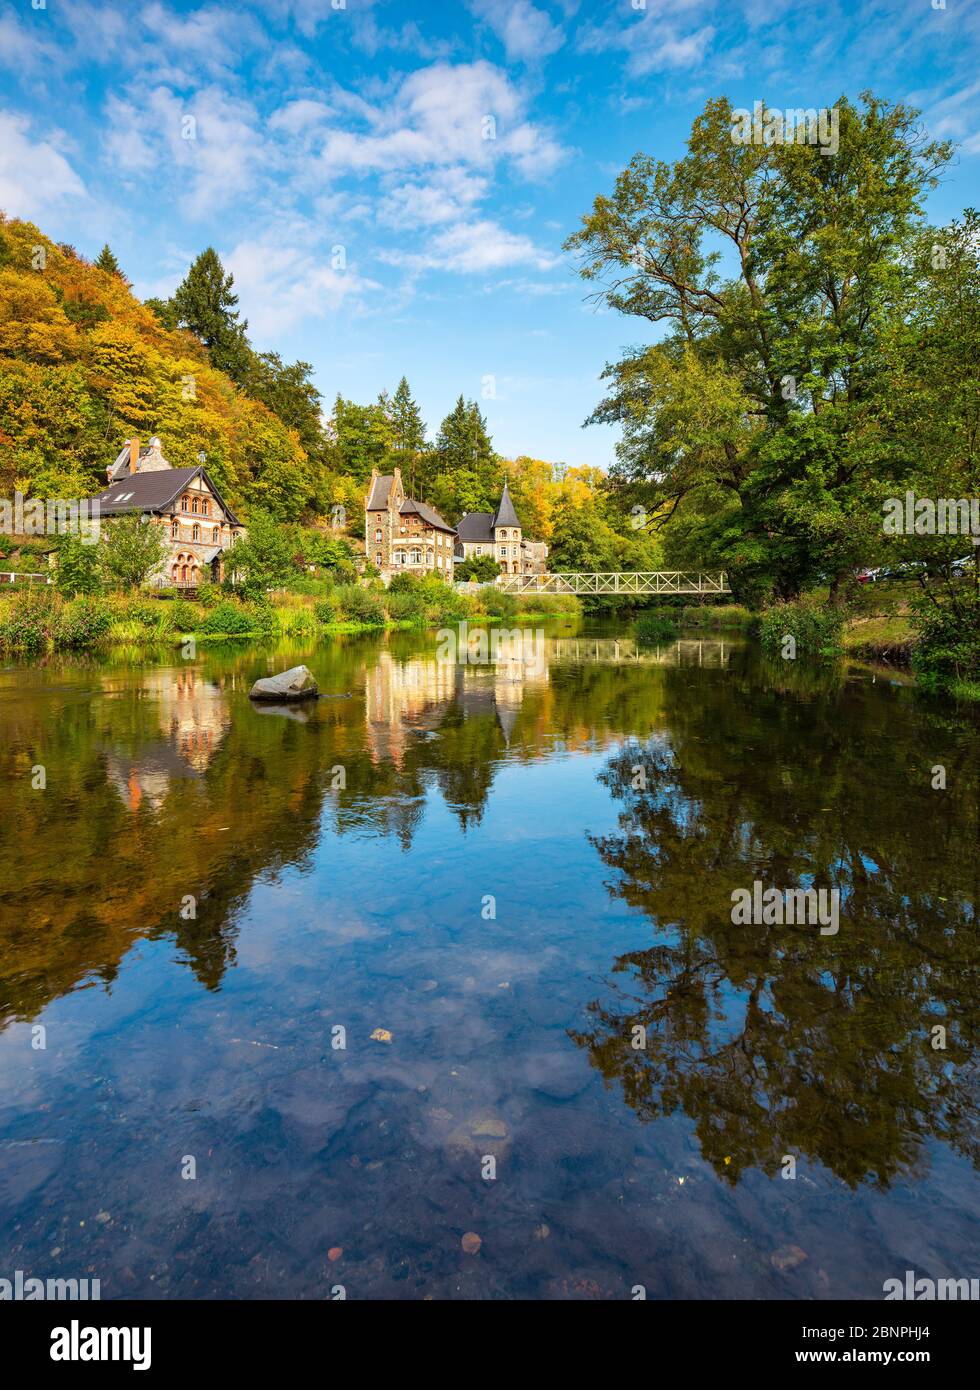 Germany, Saxony-Anhalt, Harz, Treseburg, autumn on the river Bode in the Bodetal, hotels and holiday homes Stock Photo